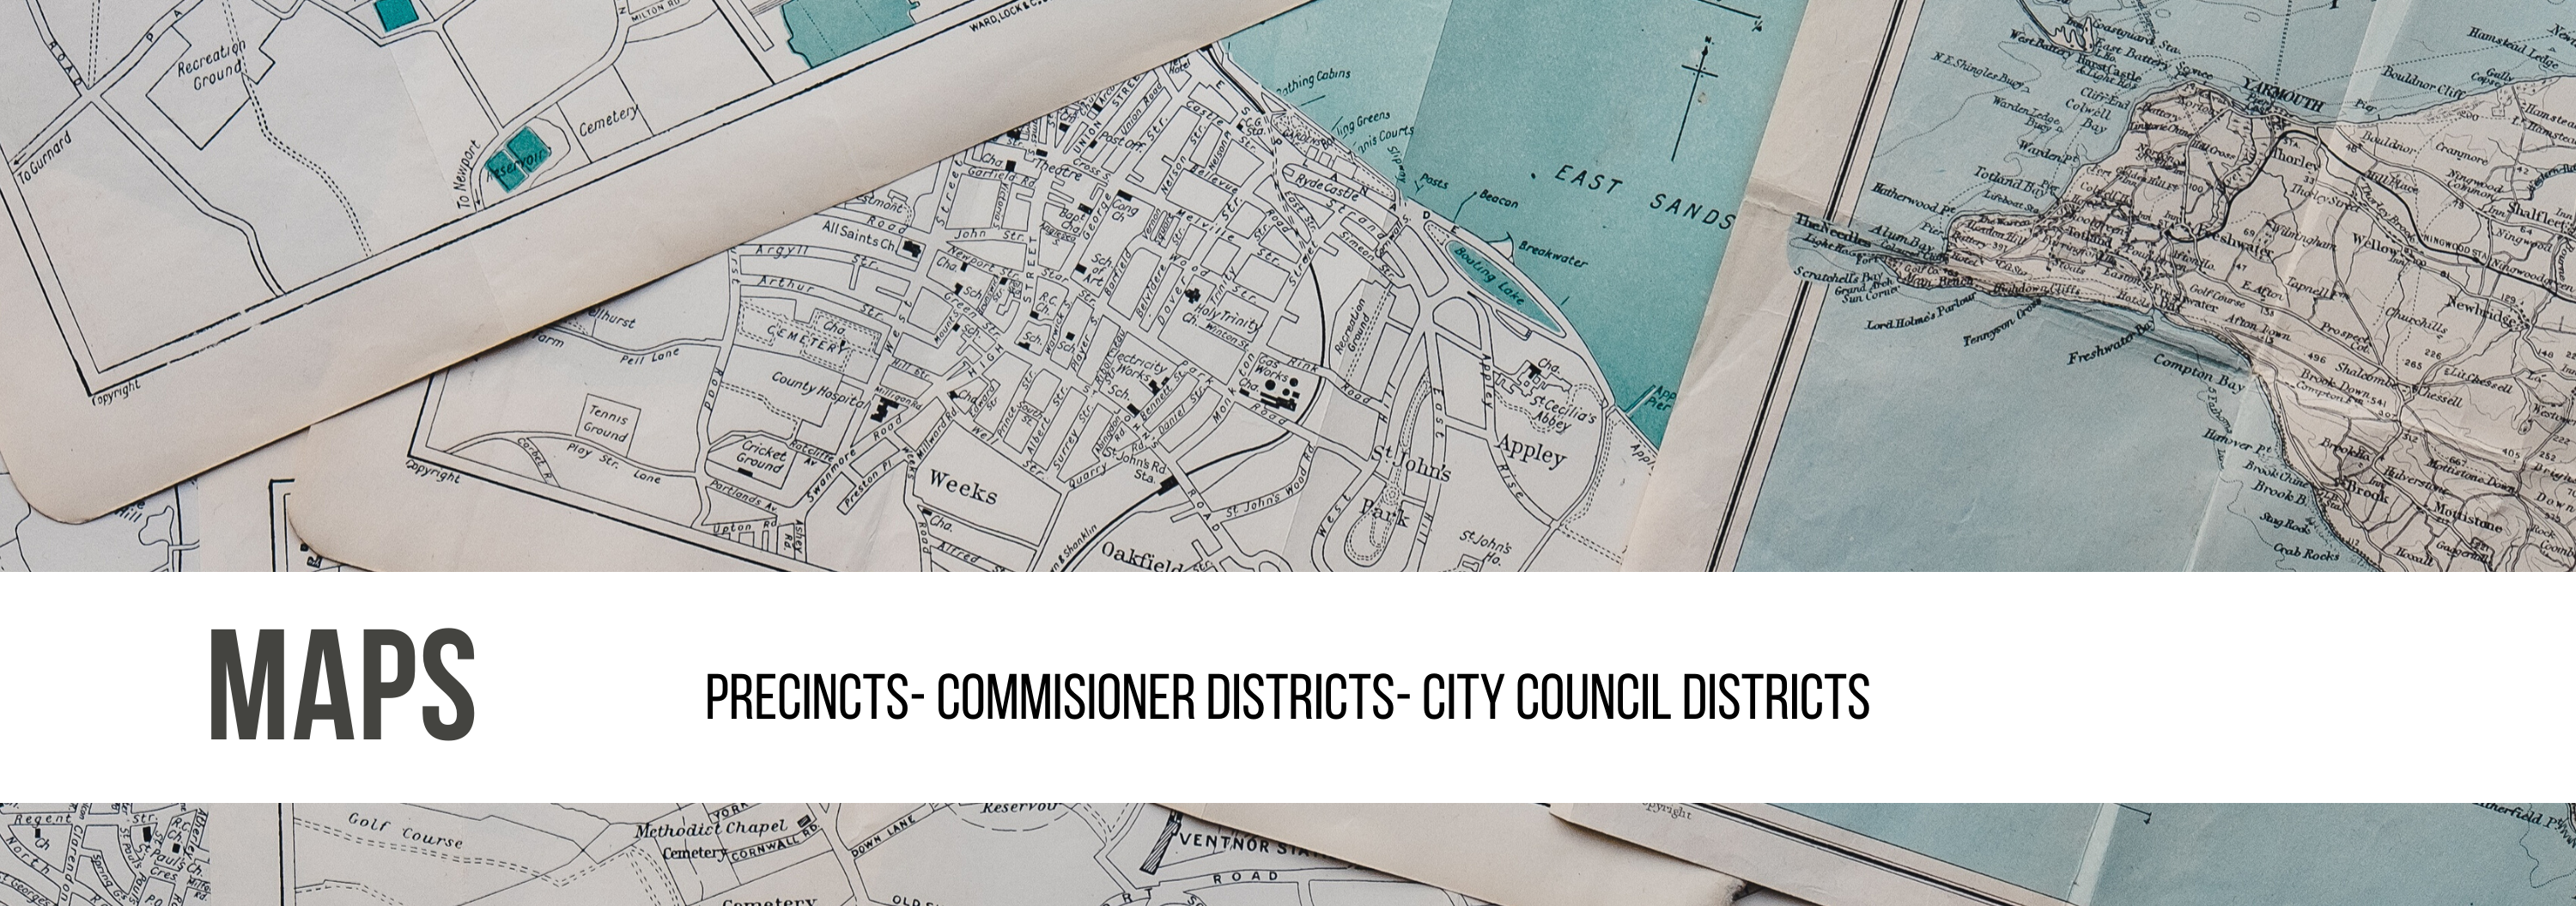 Maps: Precincts - Commisioner Districts - City Council Districts